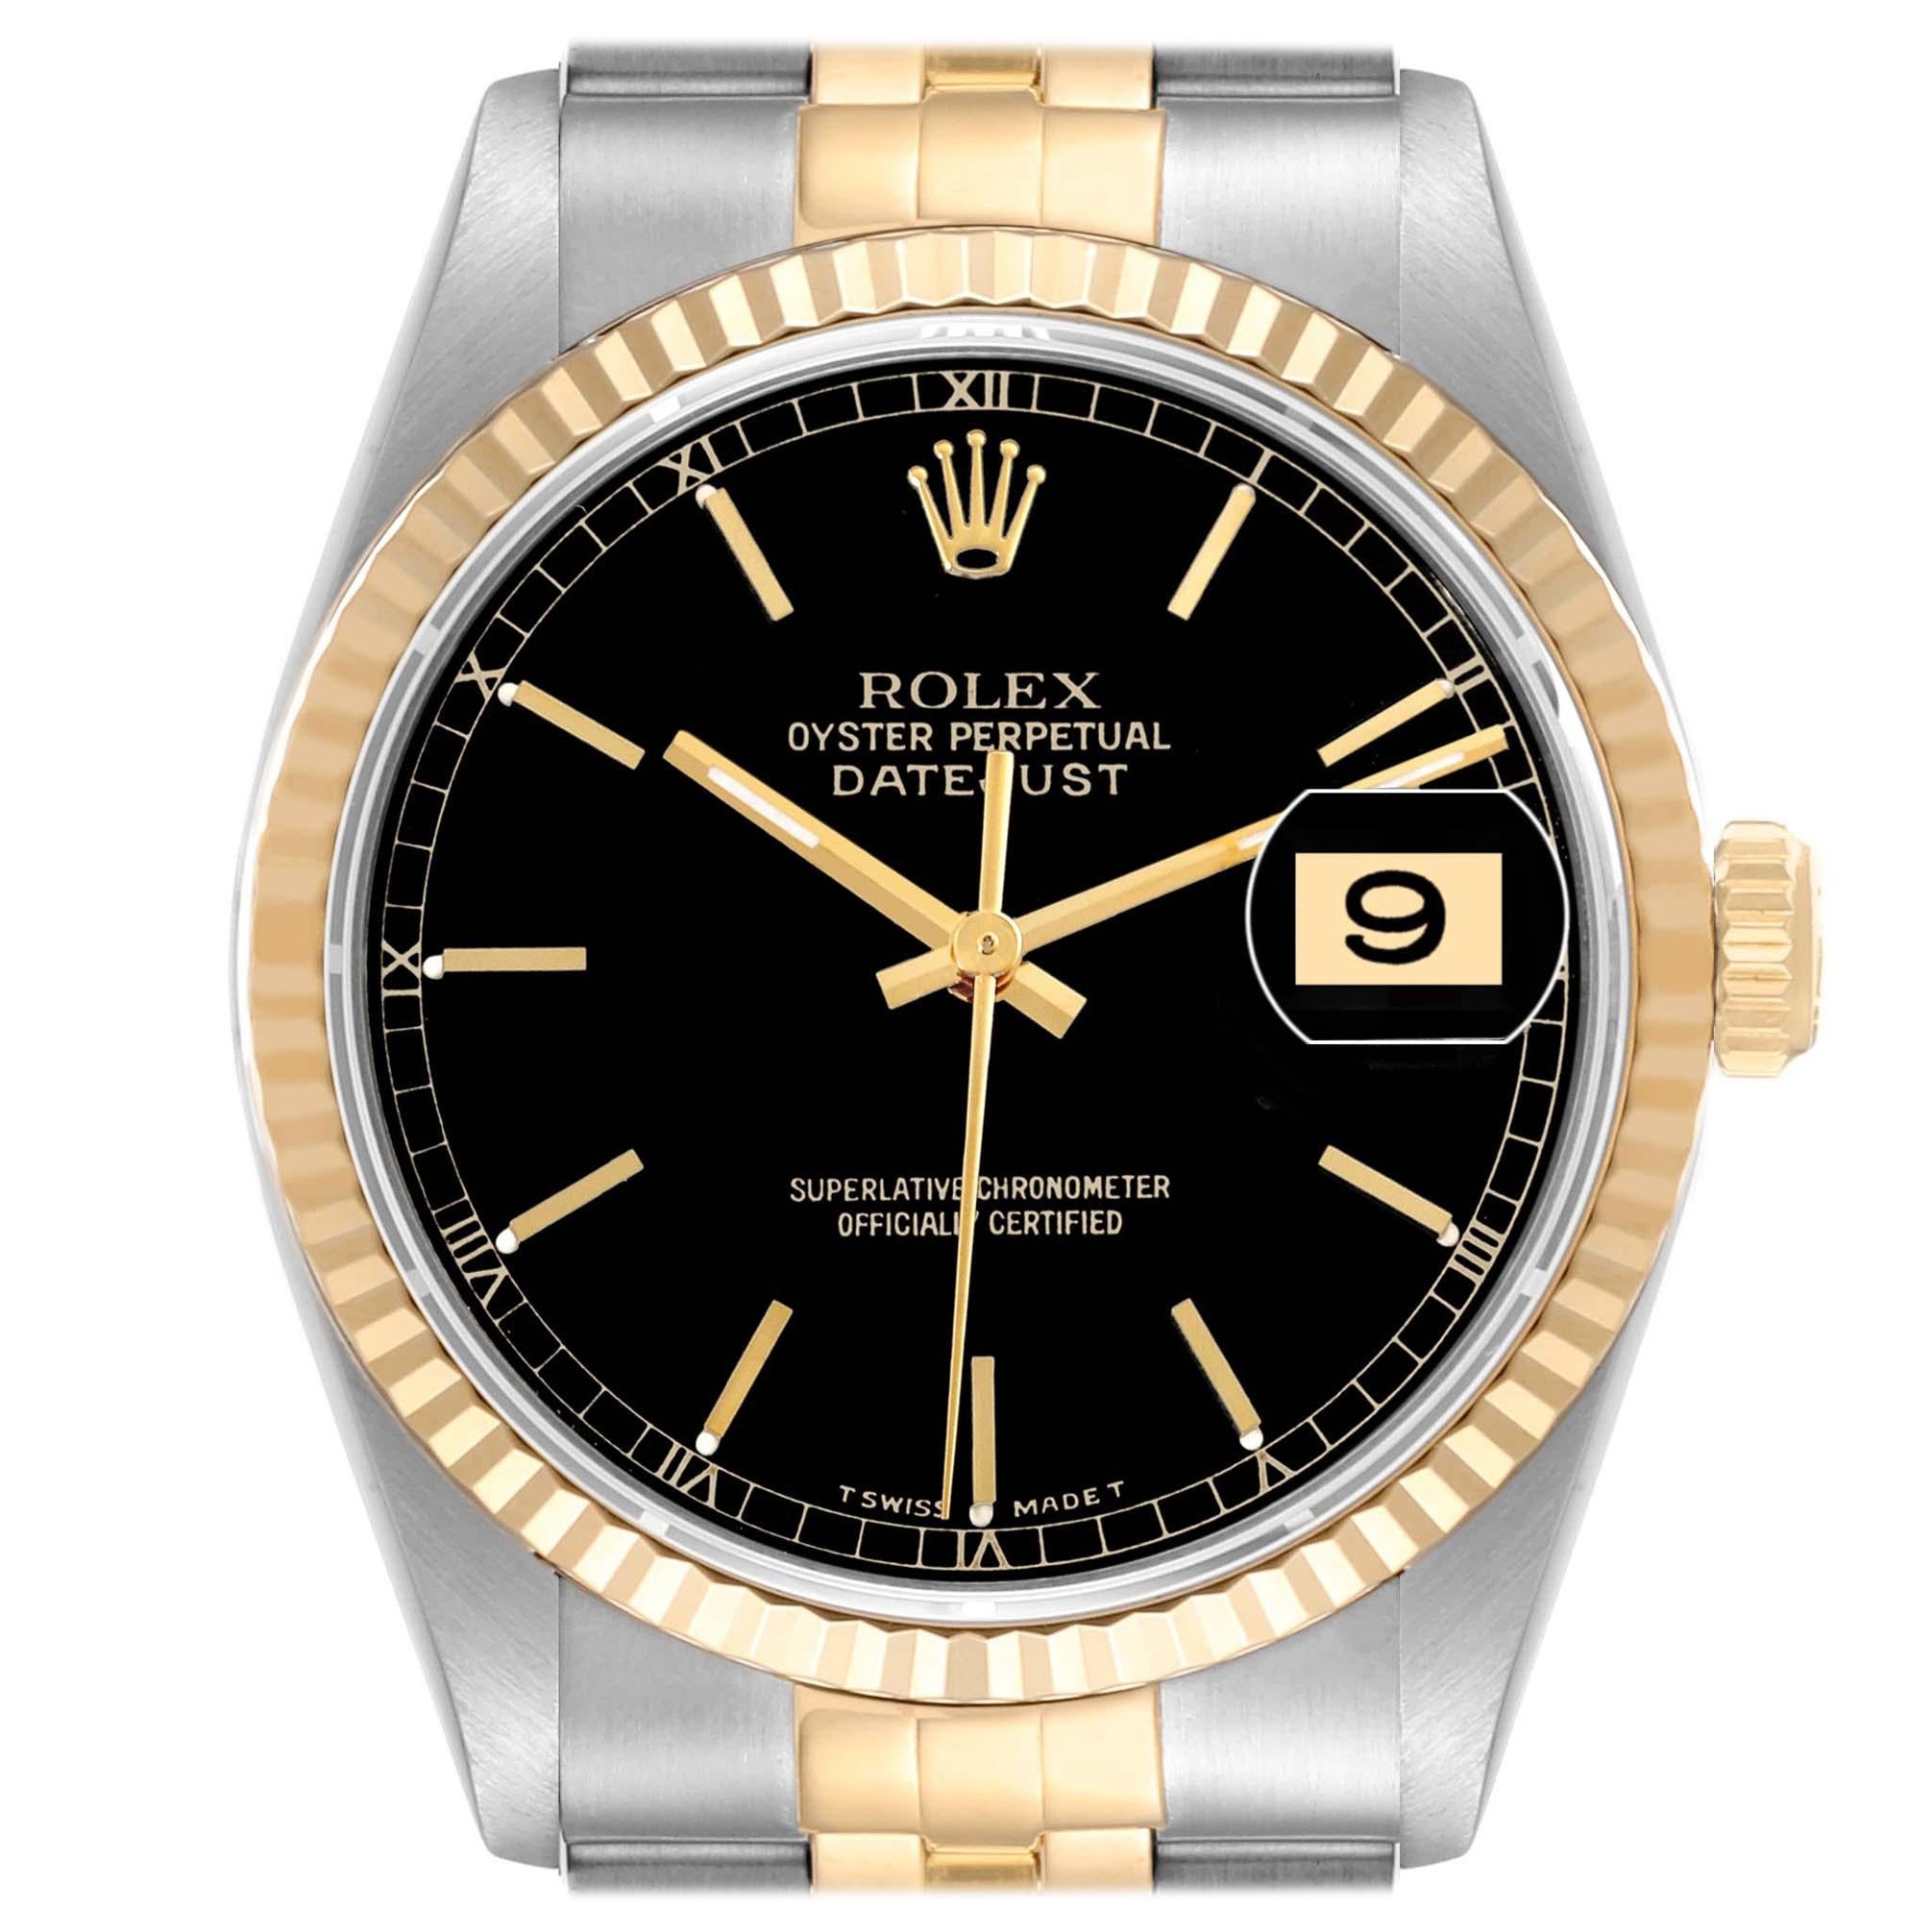 Rolex Datejust 36 Steel Yellow Gold Black Dial Mens Watch 16233 Box Papers